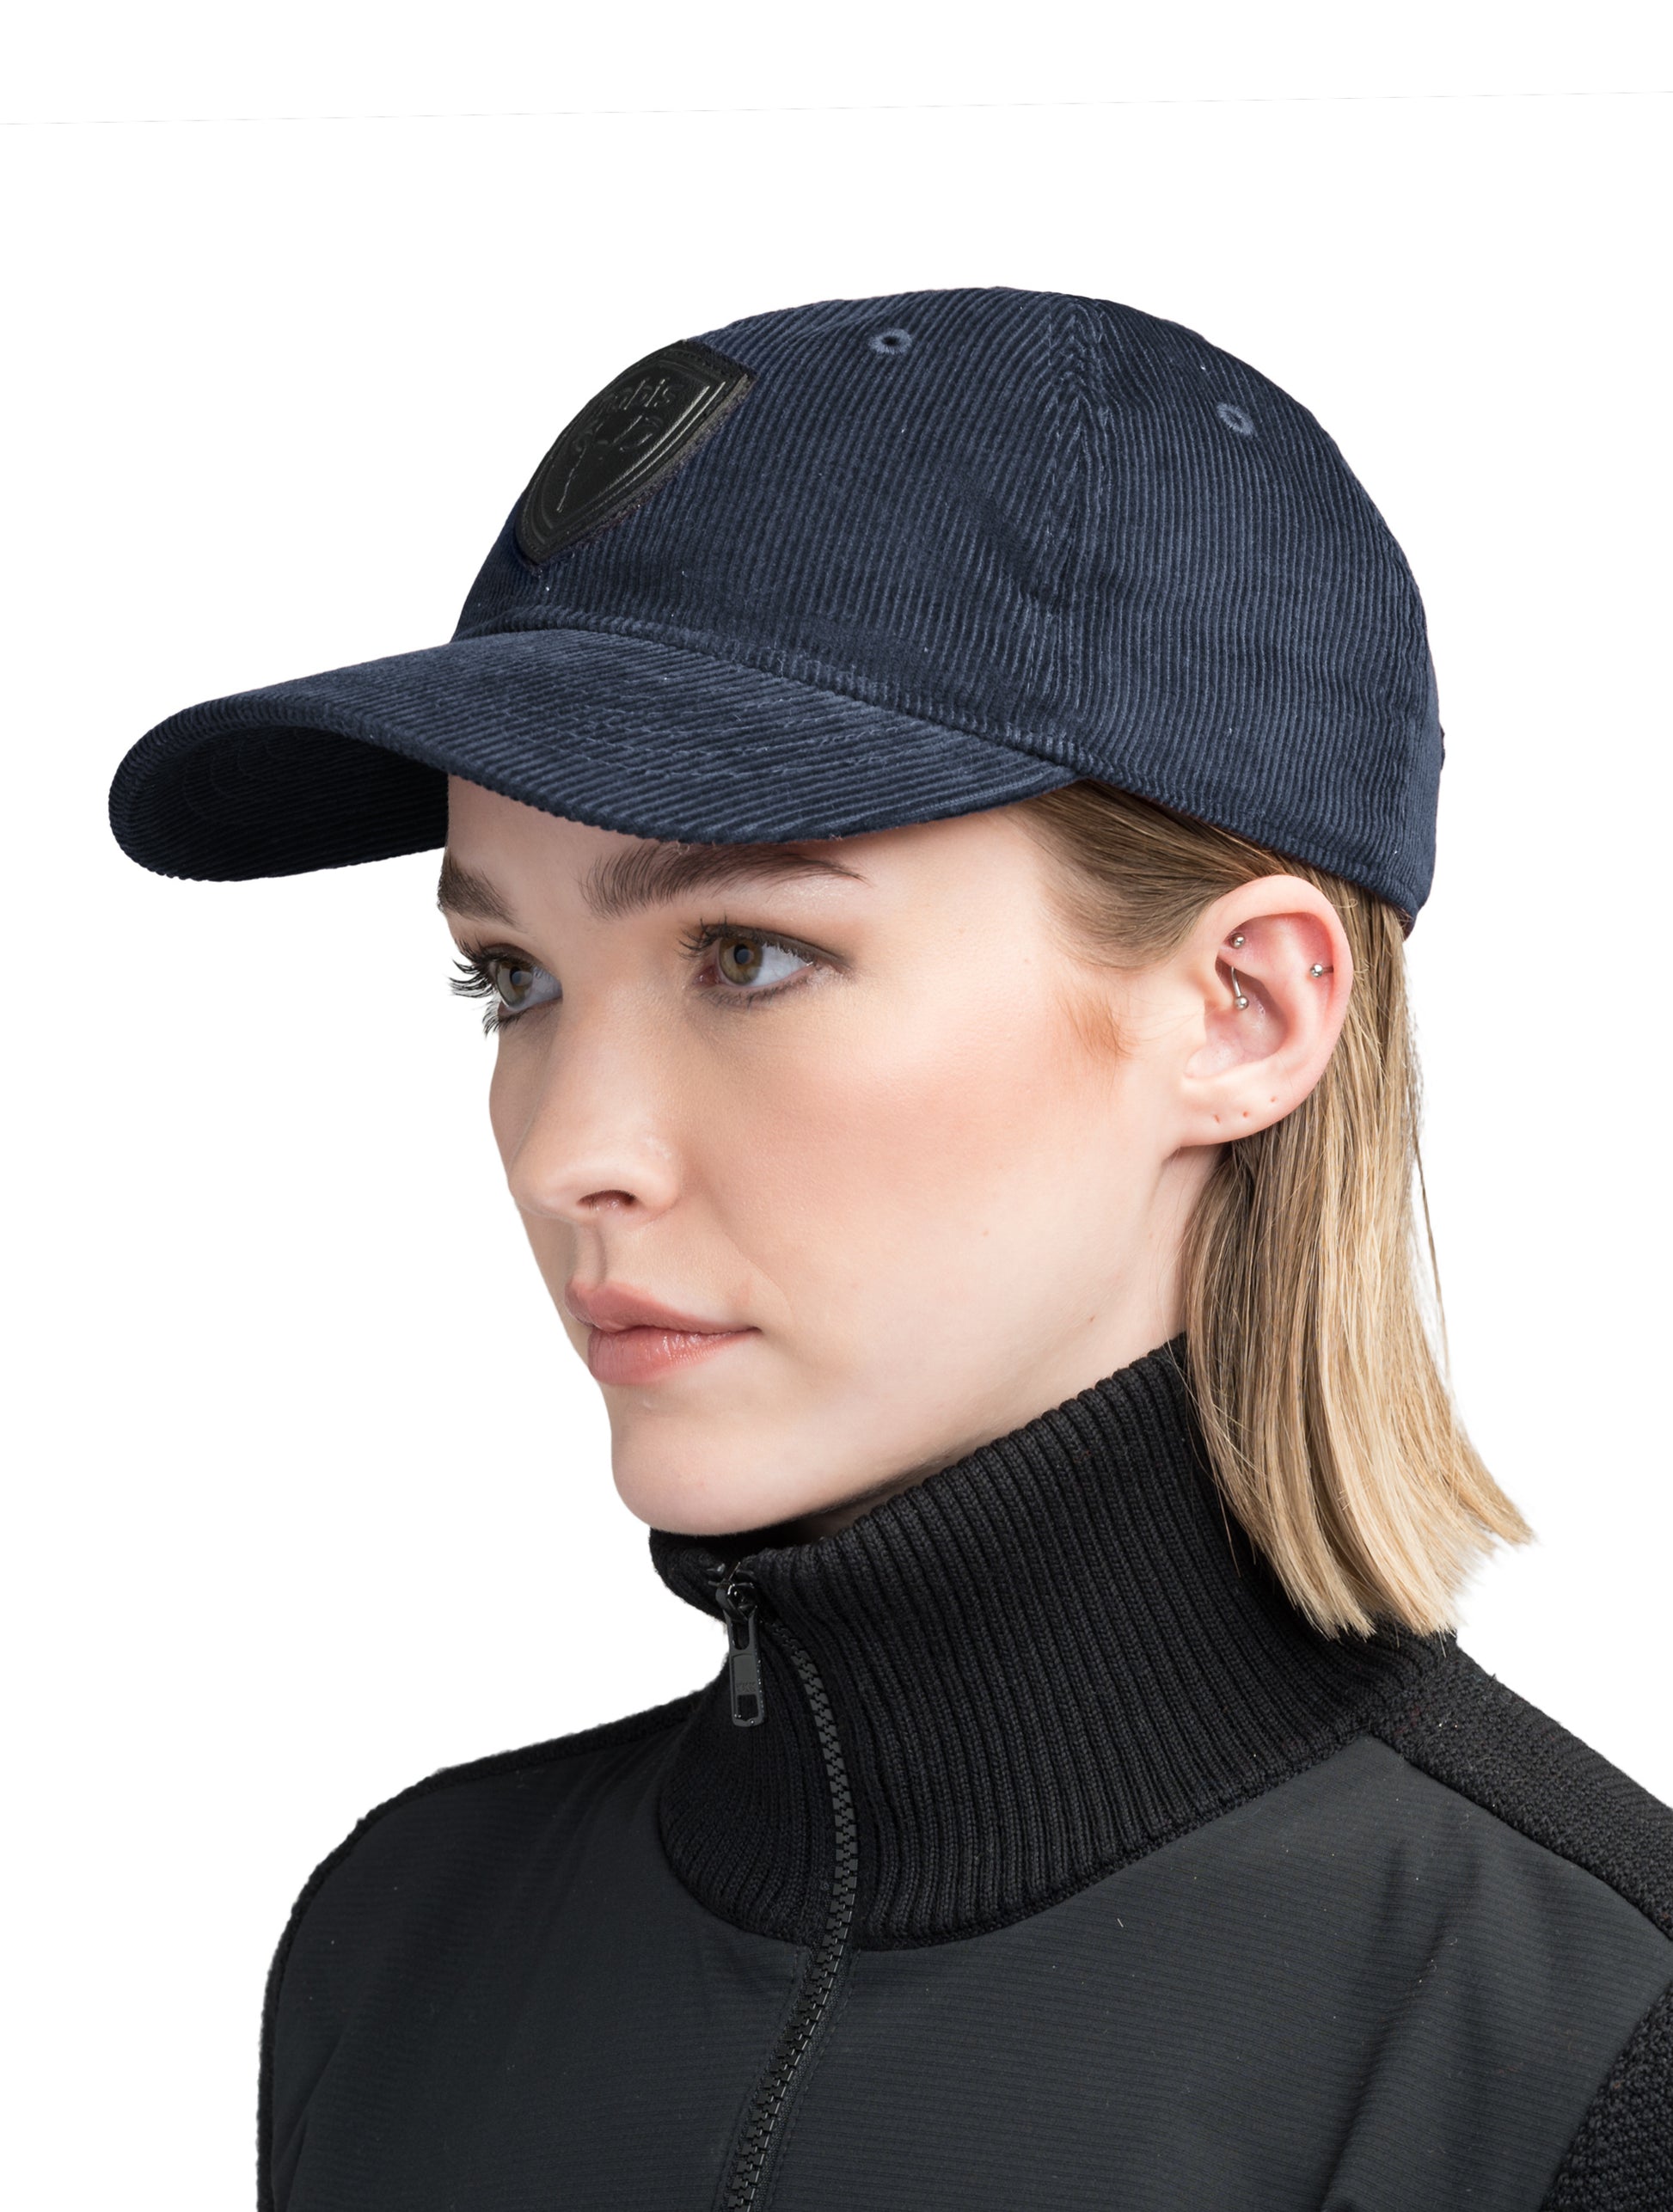 arter Unisex Tailored Ball Cap in 100% cotton corduroy, unstructured crown, curved brim, and leather strap back with metal buckle closure, in Navy